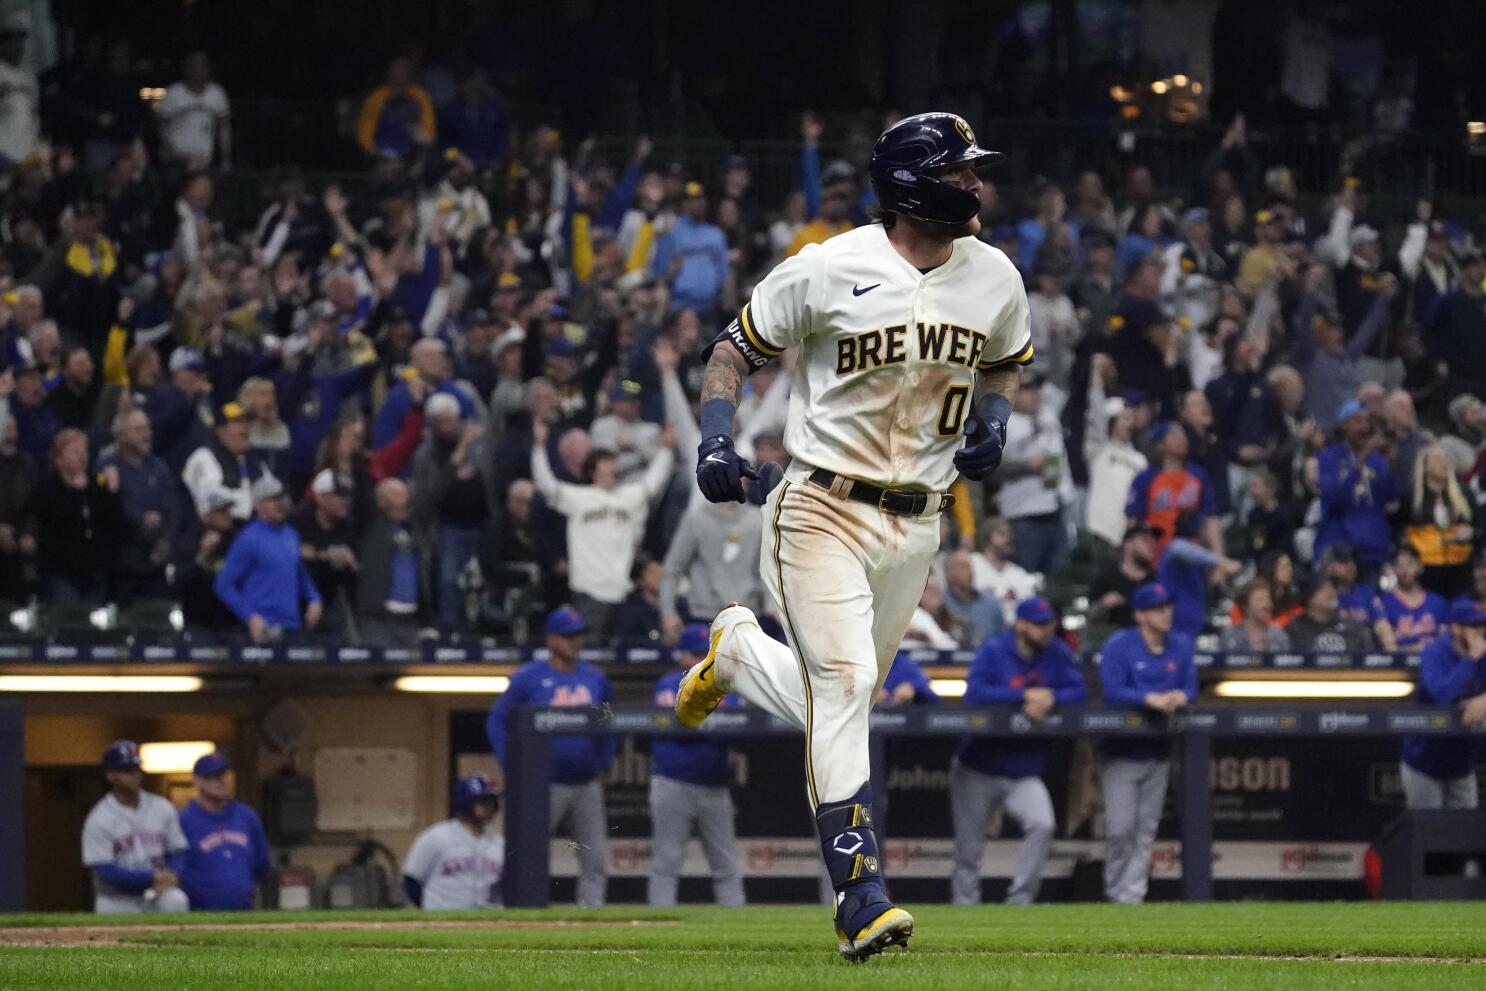 Christian Yelich talks about Freddy Peralta setting the tone in